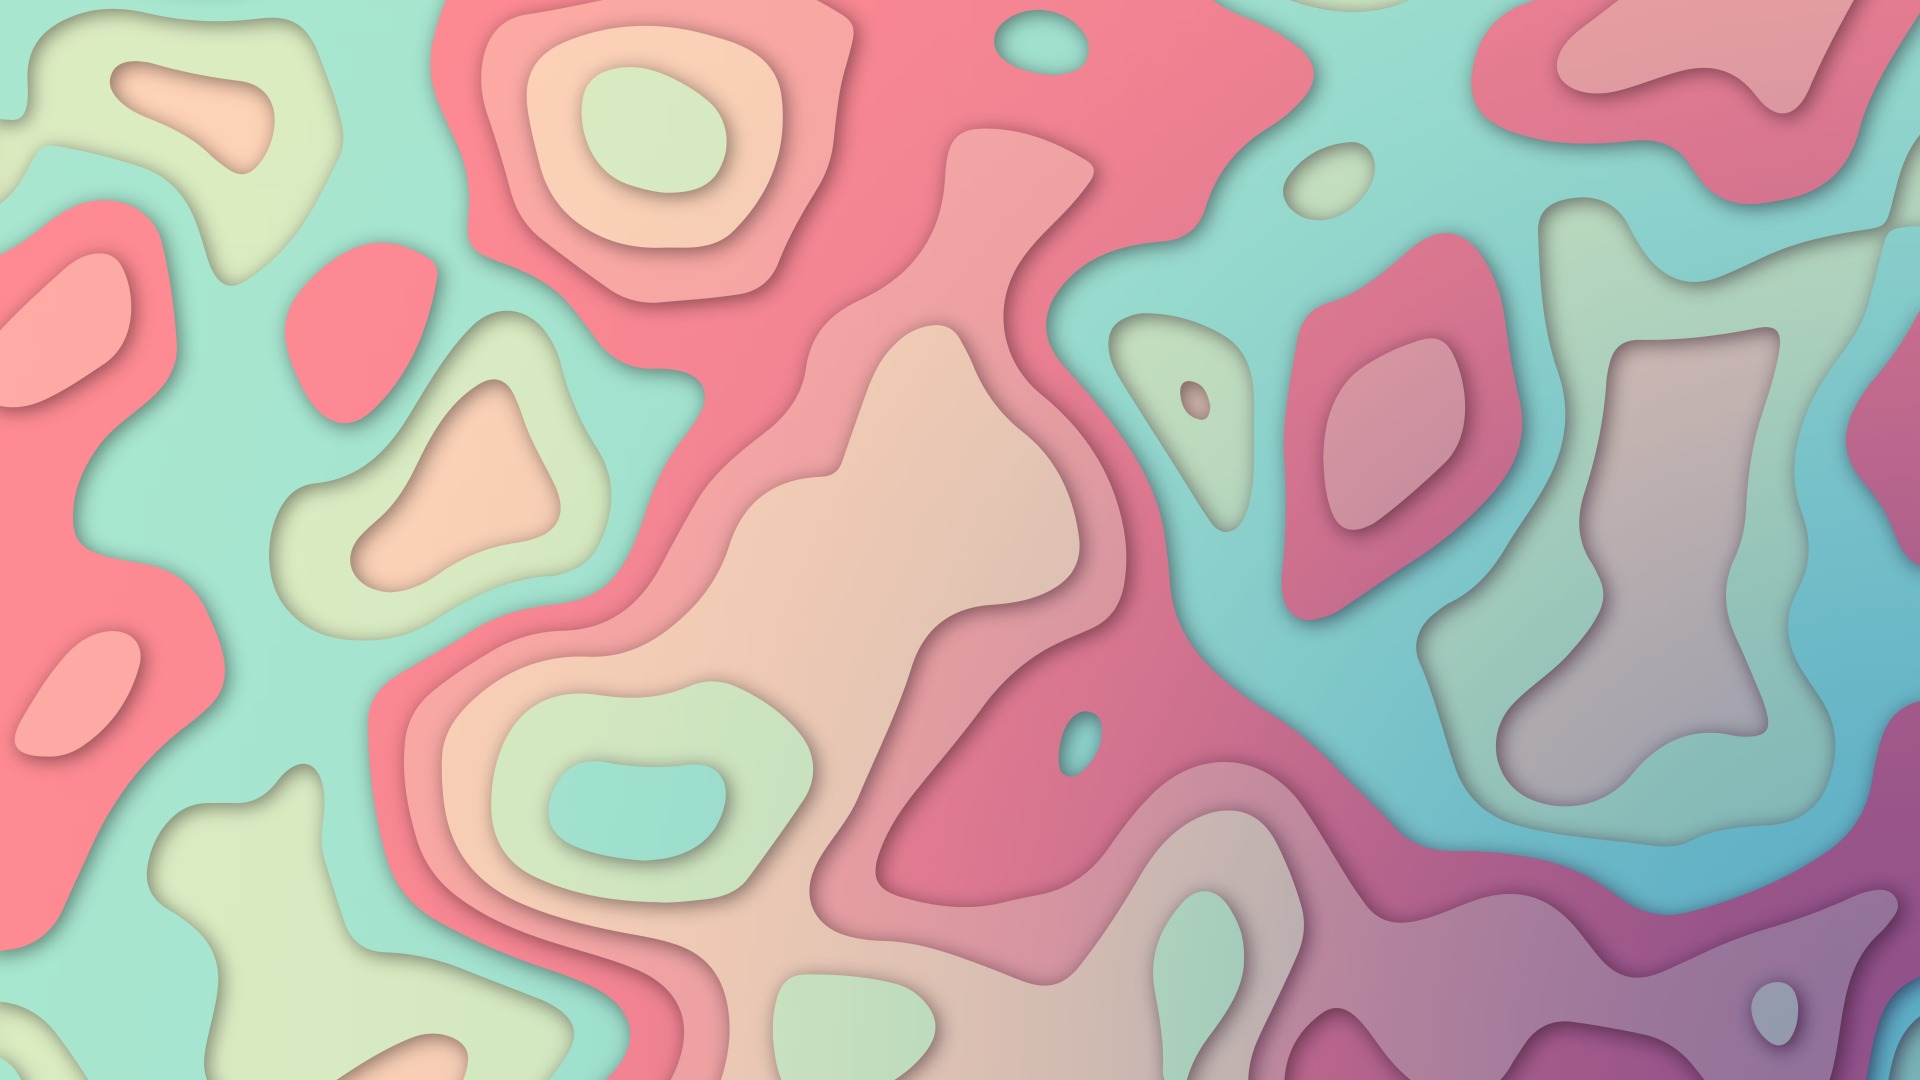 Pastel Slide Elevation Colorful Abstract 1080p Laptop